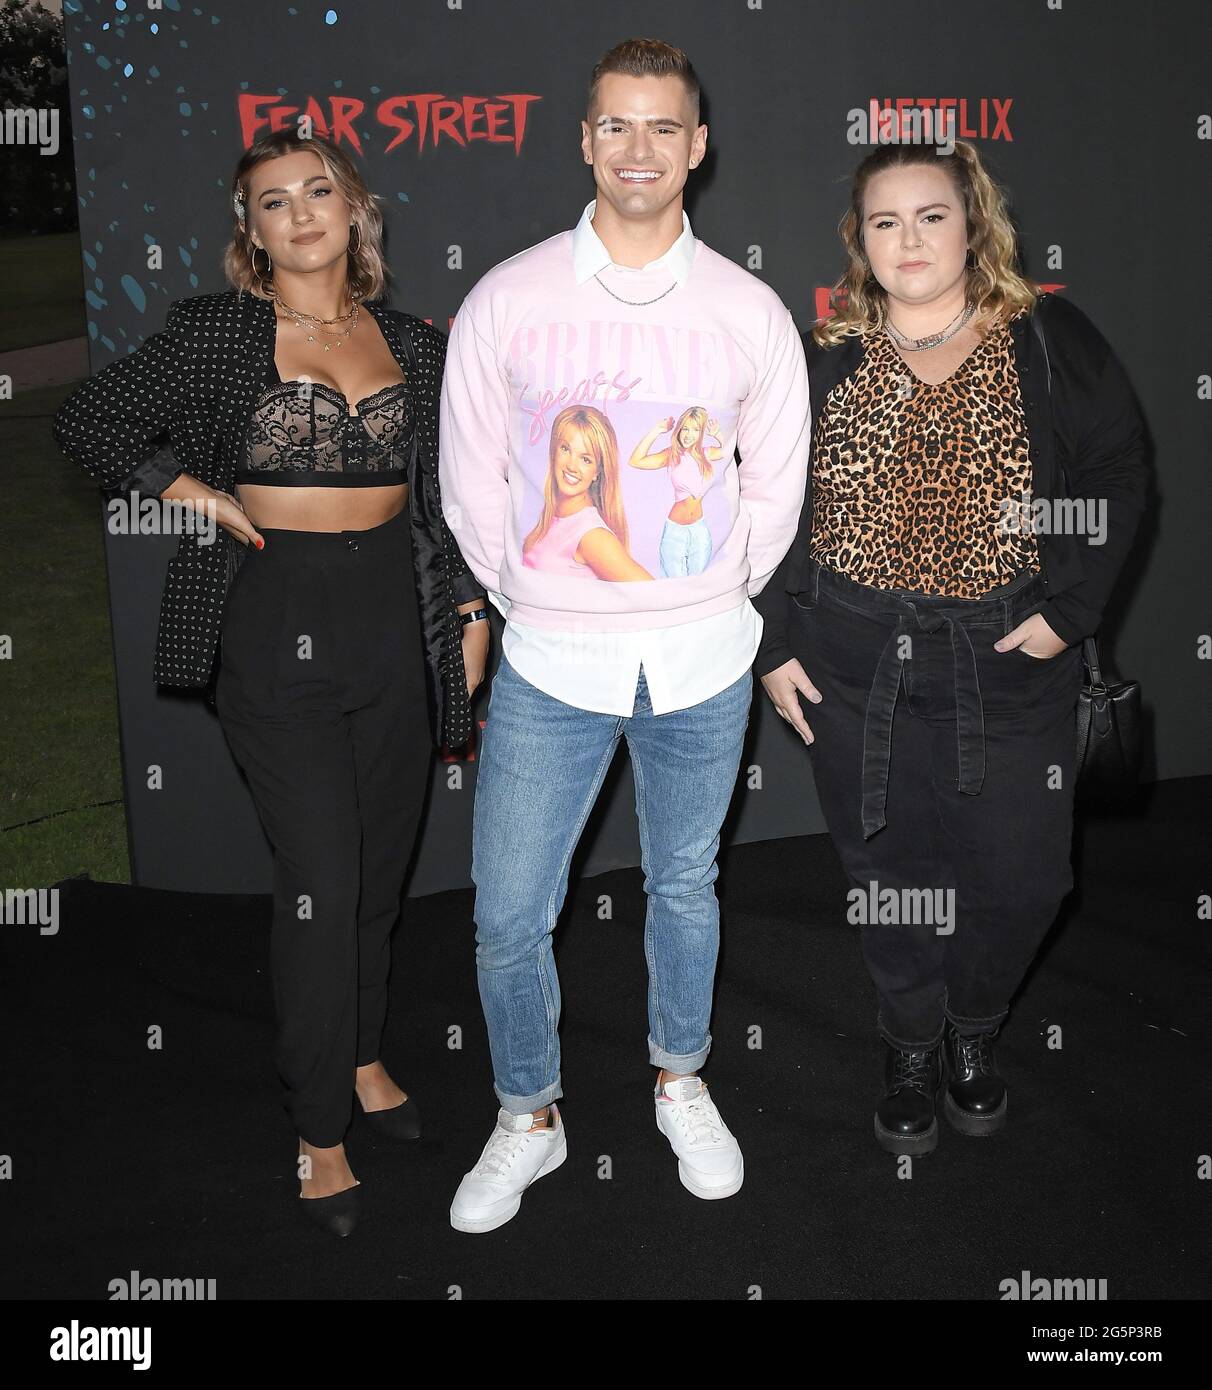 Los Angeles, 28th June, 2021. (L-R) Haley Jordan, Caleb Marshall, Allison arrives the FEAR STREET Premiere held at the LA State Historic Park in Los Angeles, CA on